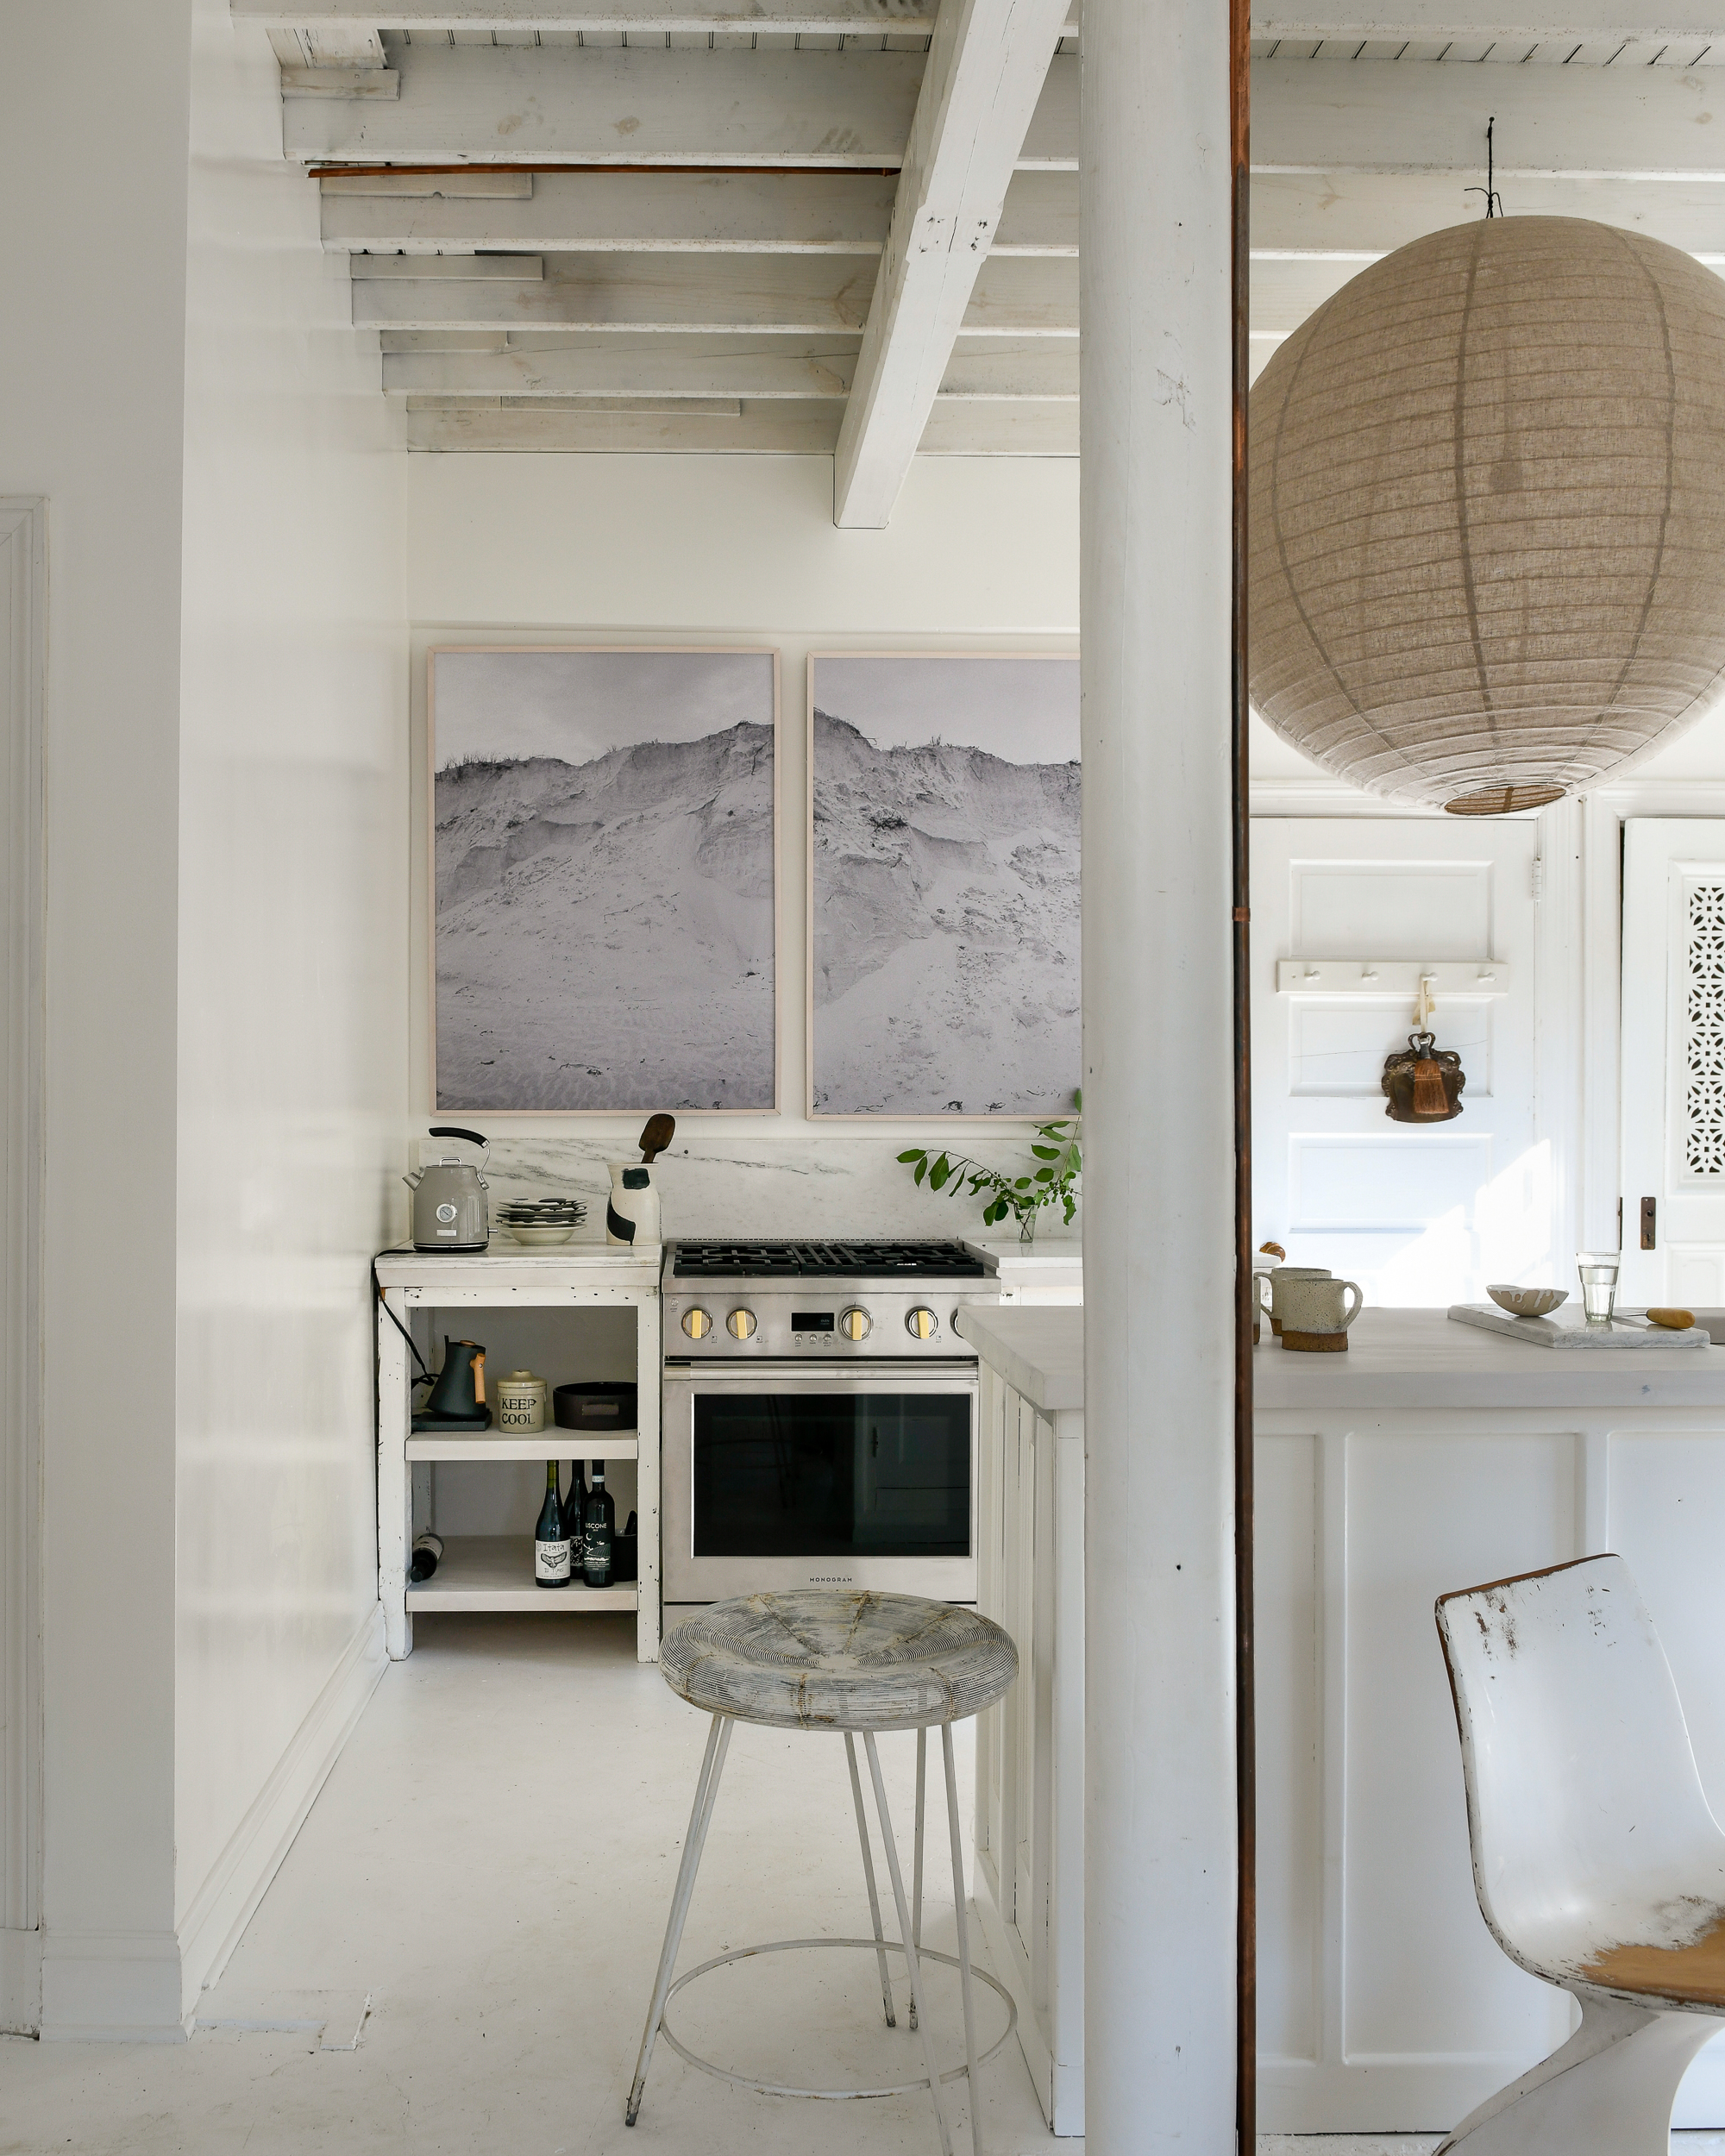 Leanne Ford’s bright and simple kitchen with walls painted in Natural White and styled with large grey-scaled artwork